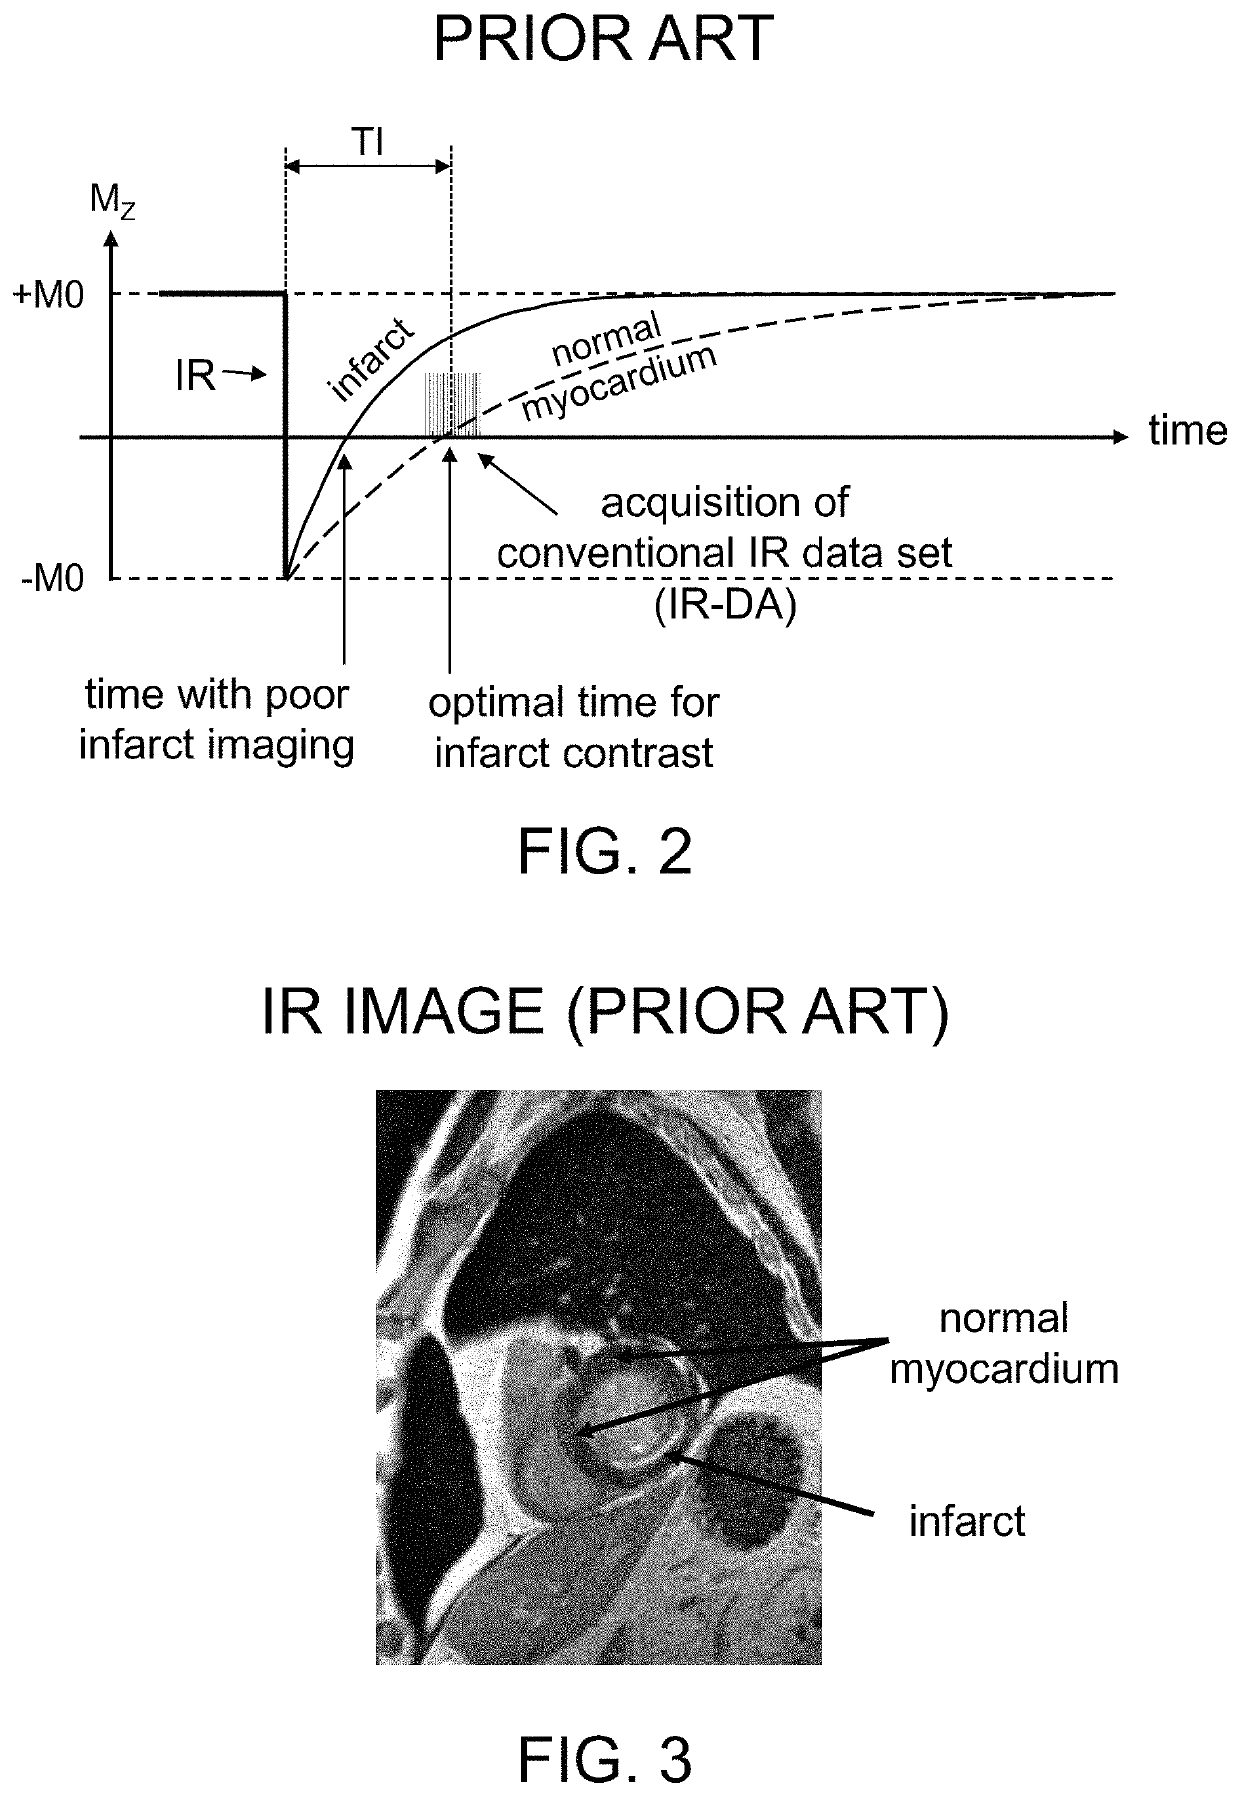 Systems and methods for phase-sensitive inversion recovery MR imaging with reduced sensitivity to cardiac motion